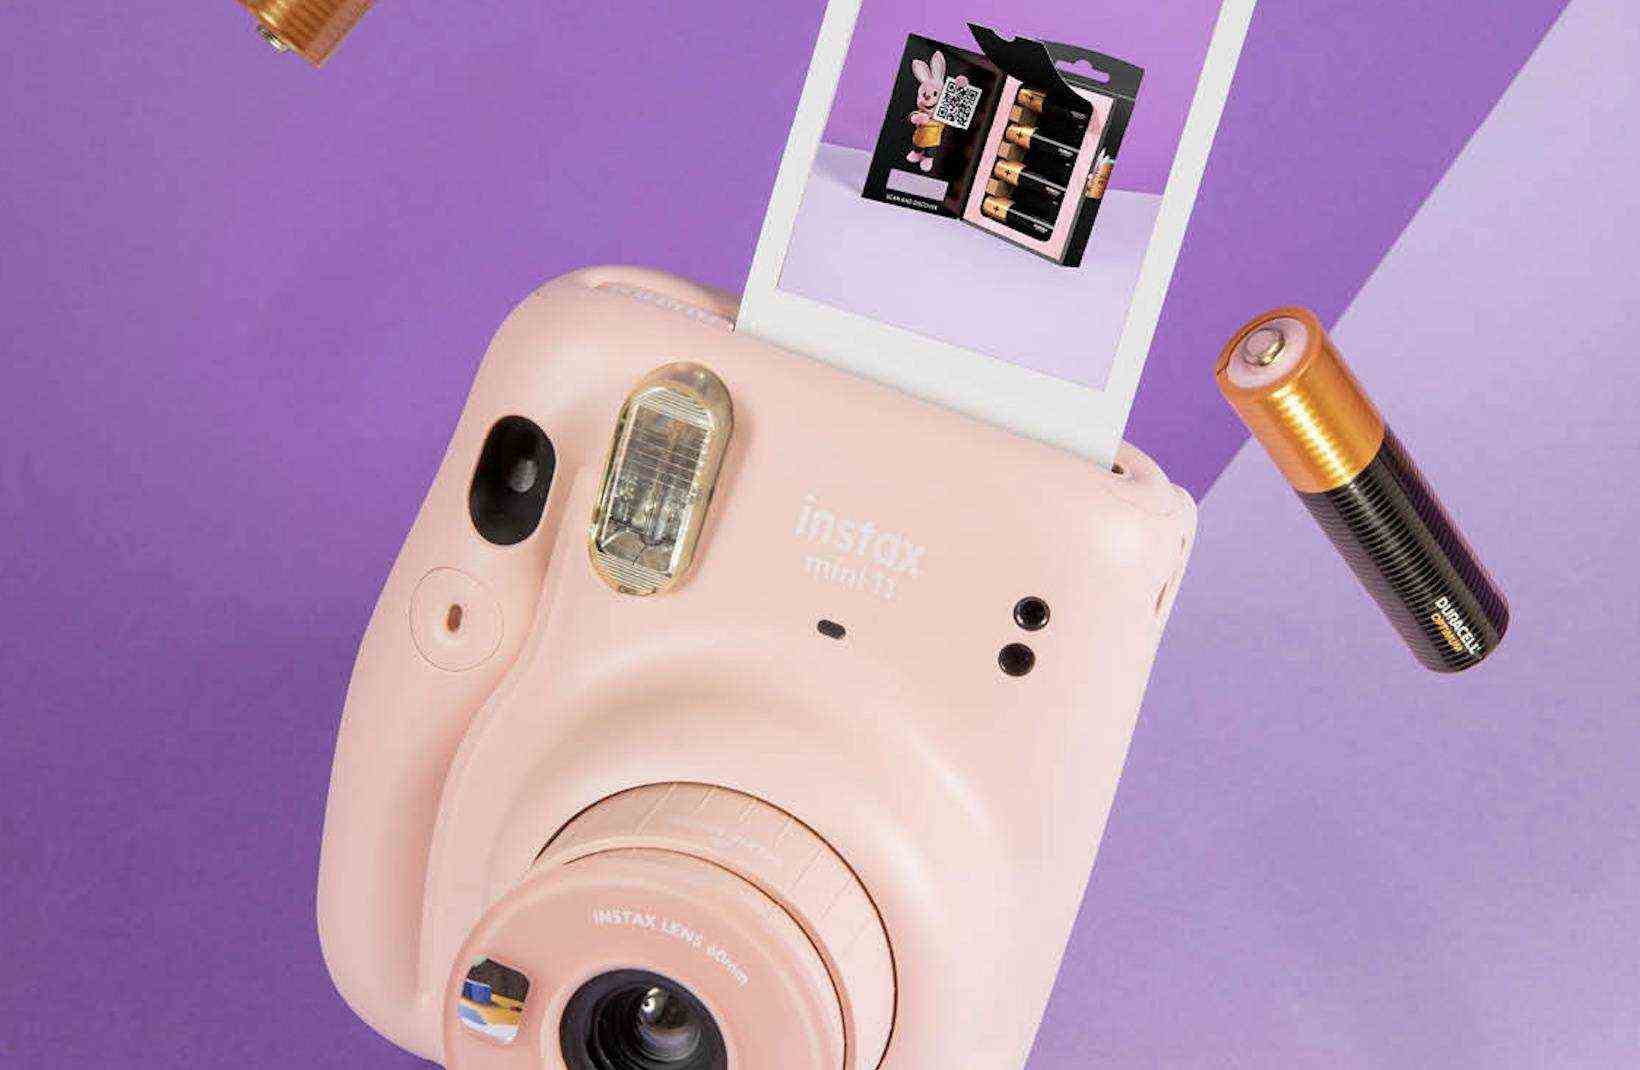 According to Duracell, the Optimum battery can take 200 more photos with the Fujifilm Instax Mini 11.